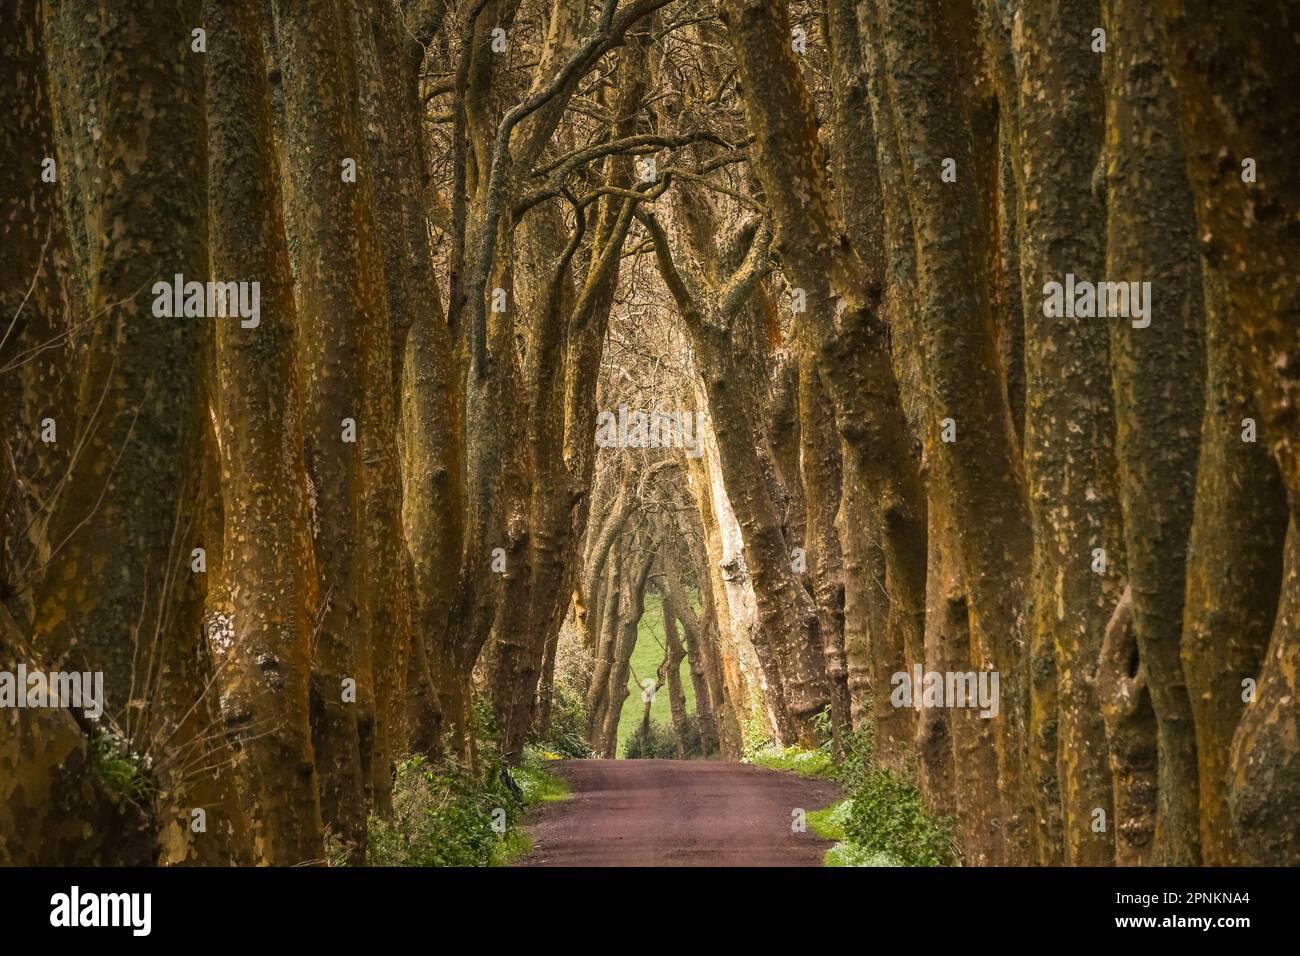 A red dirt road between massive London Plane trees forming a tree tunnel on the Azores Island of Sao Miguel near Povoacao, Portugal. Stock Photo